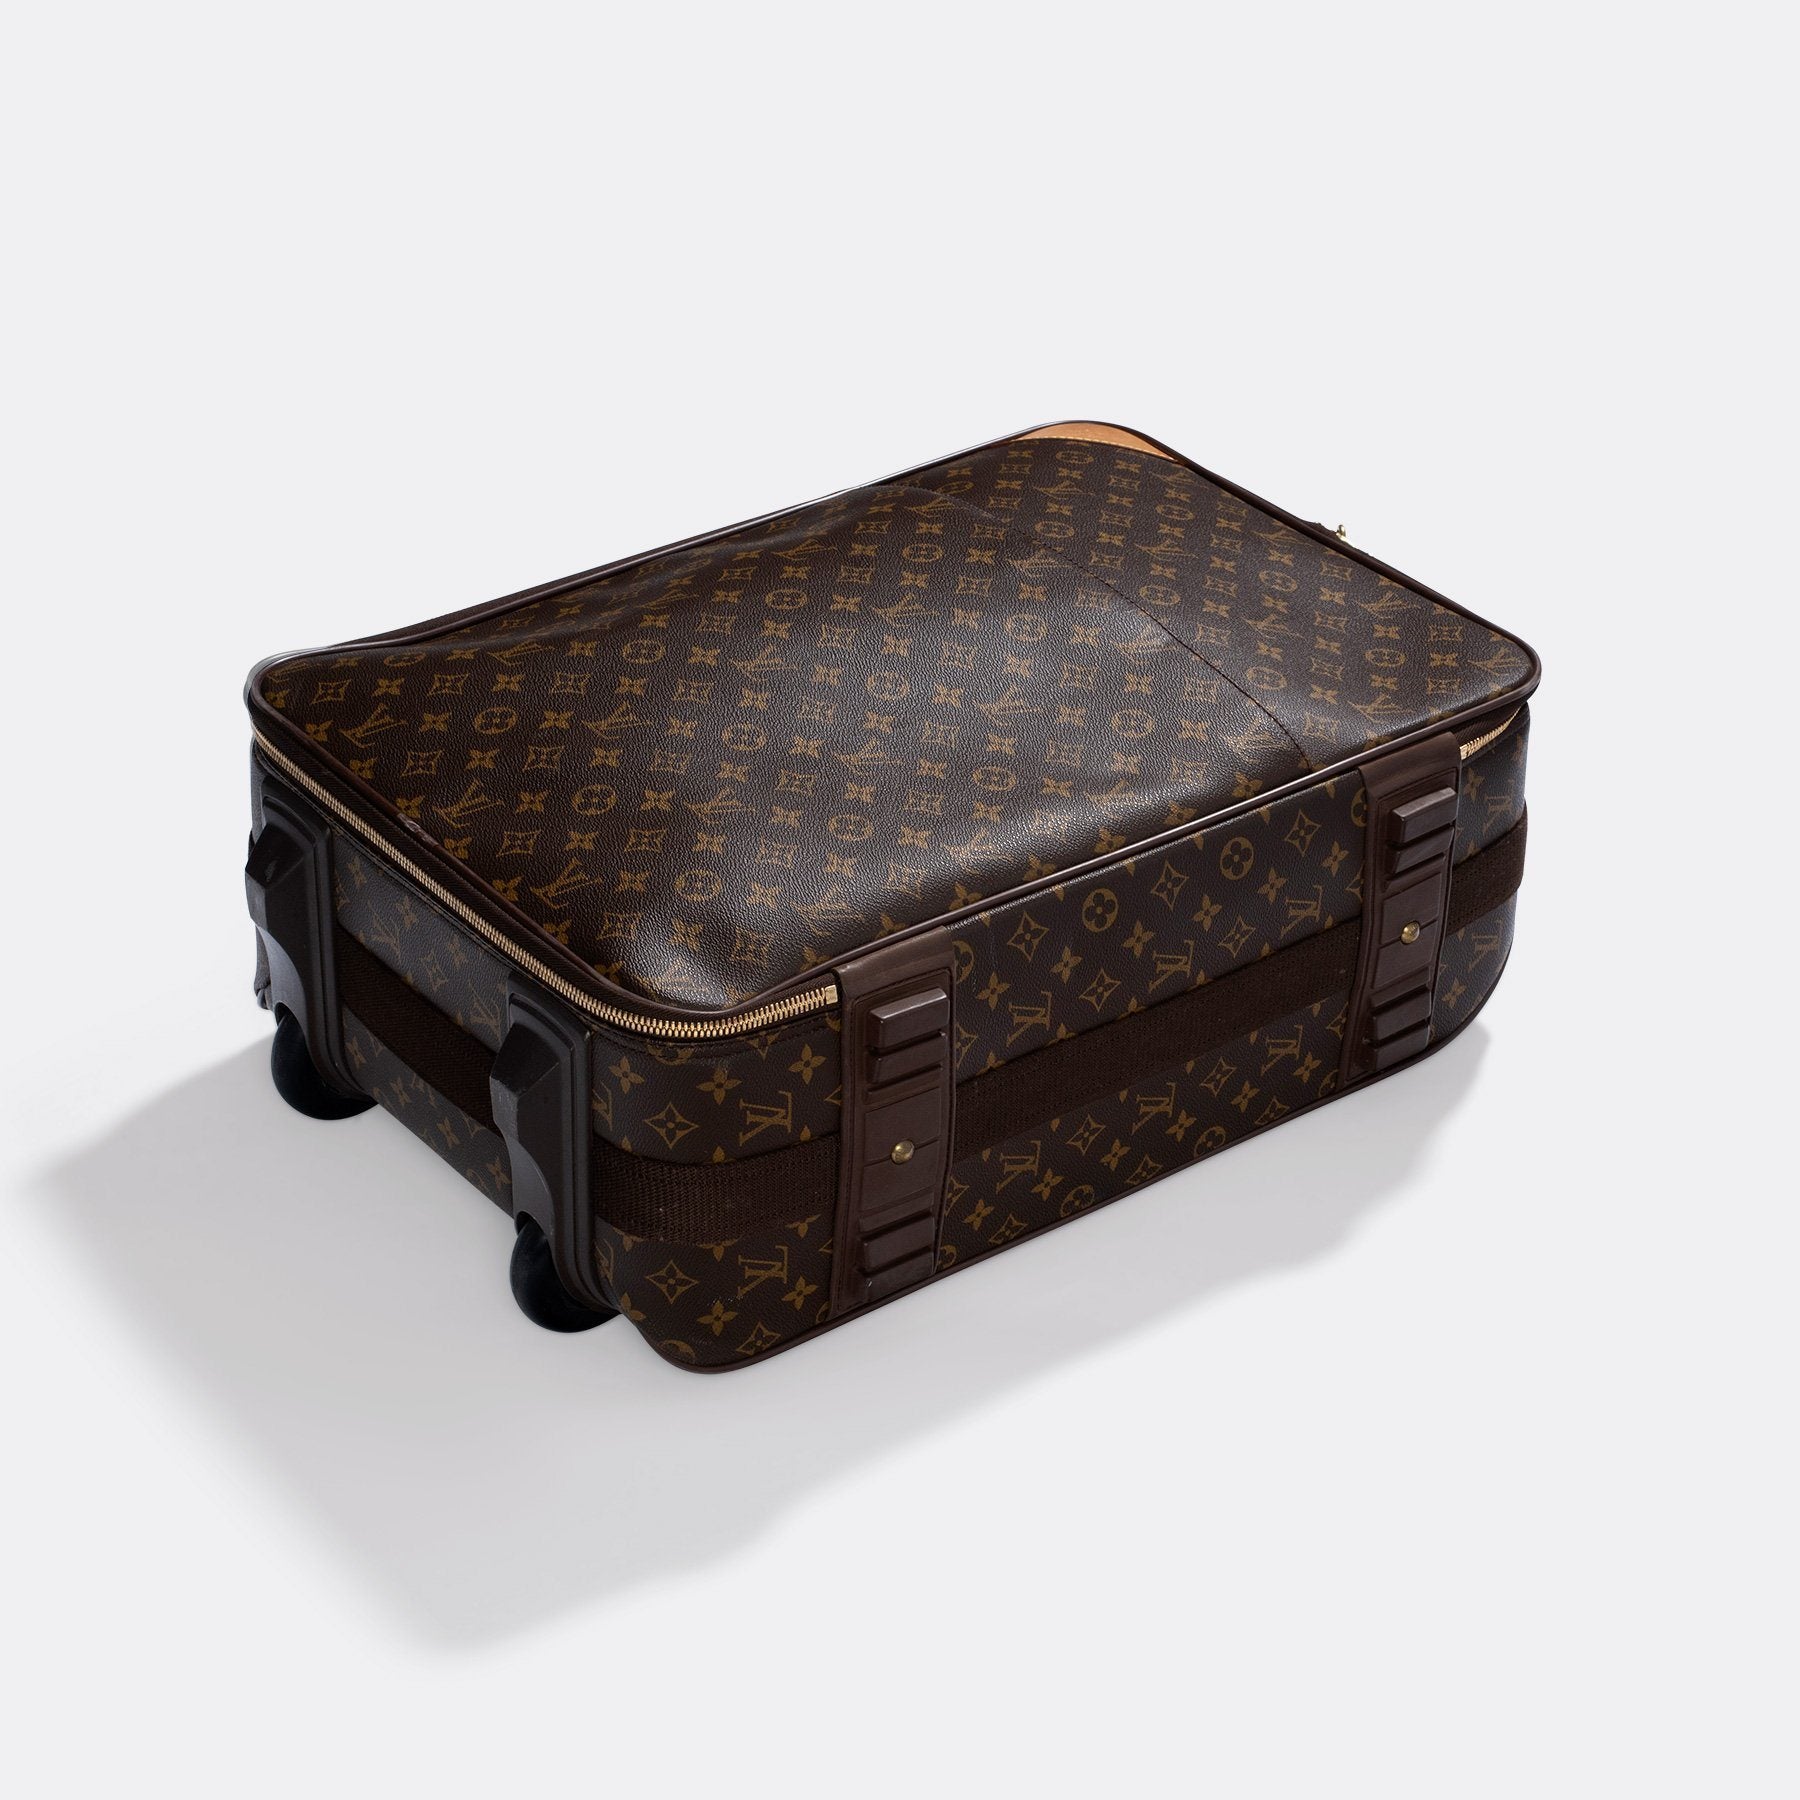 Louis Vuitton Legere 55 Rolling Luggage Carry-on Suitcase 870081